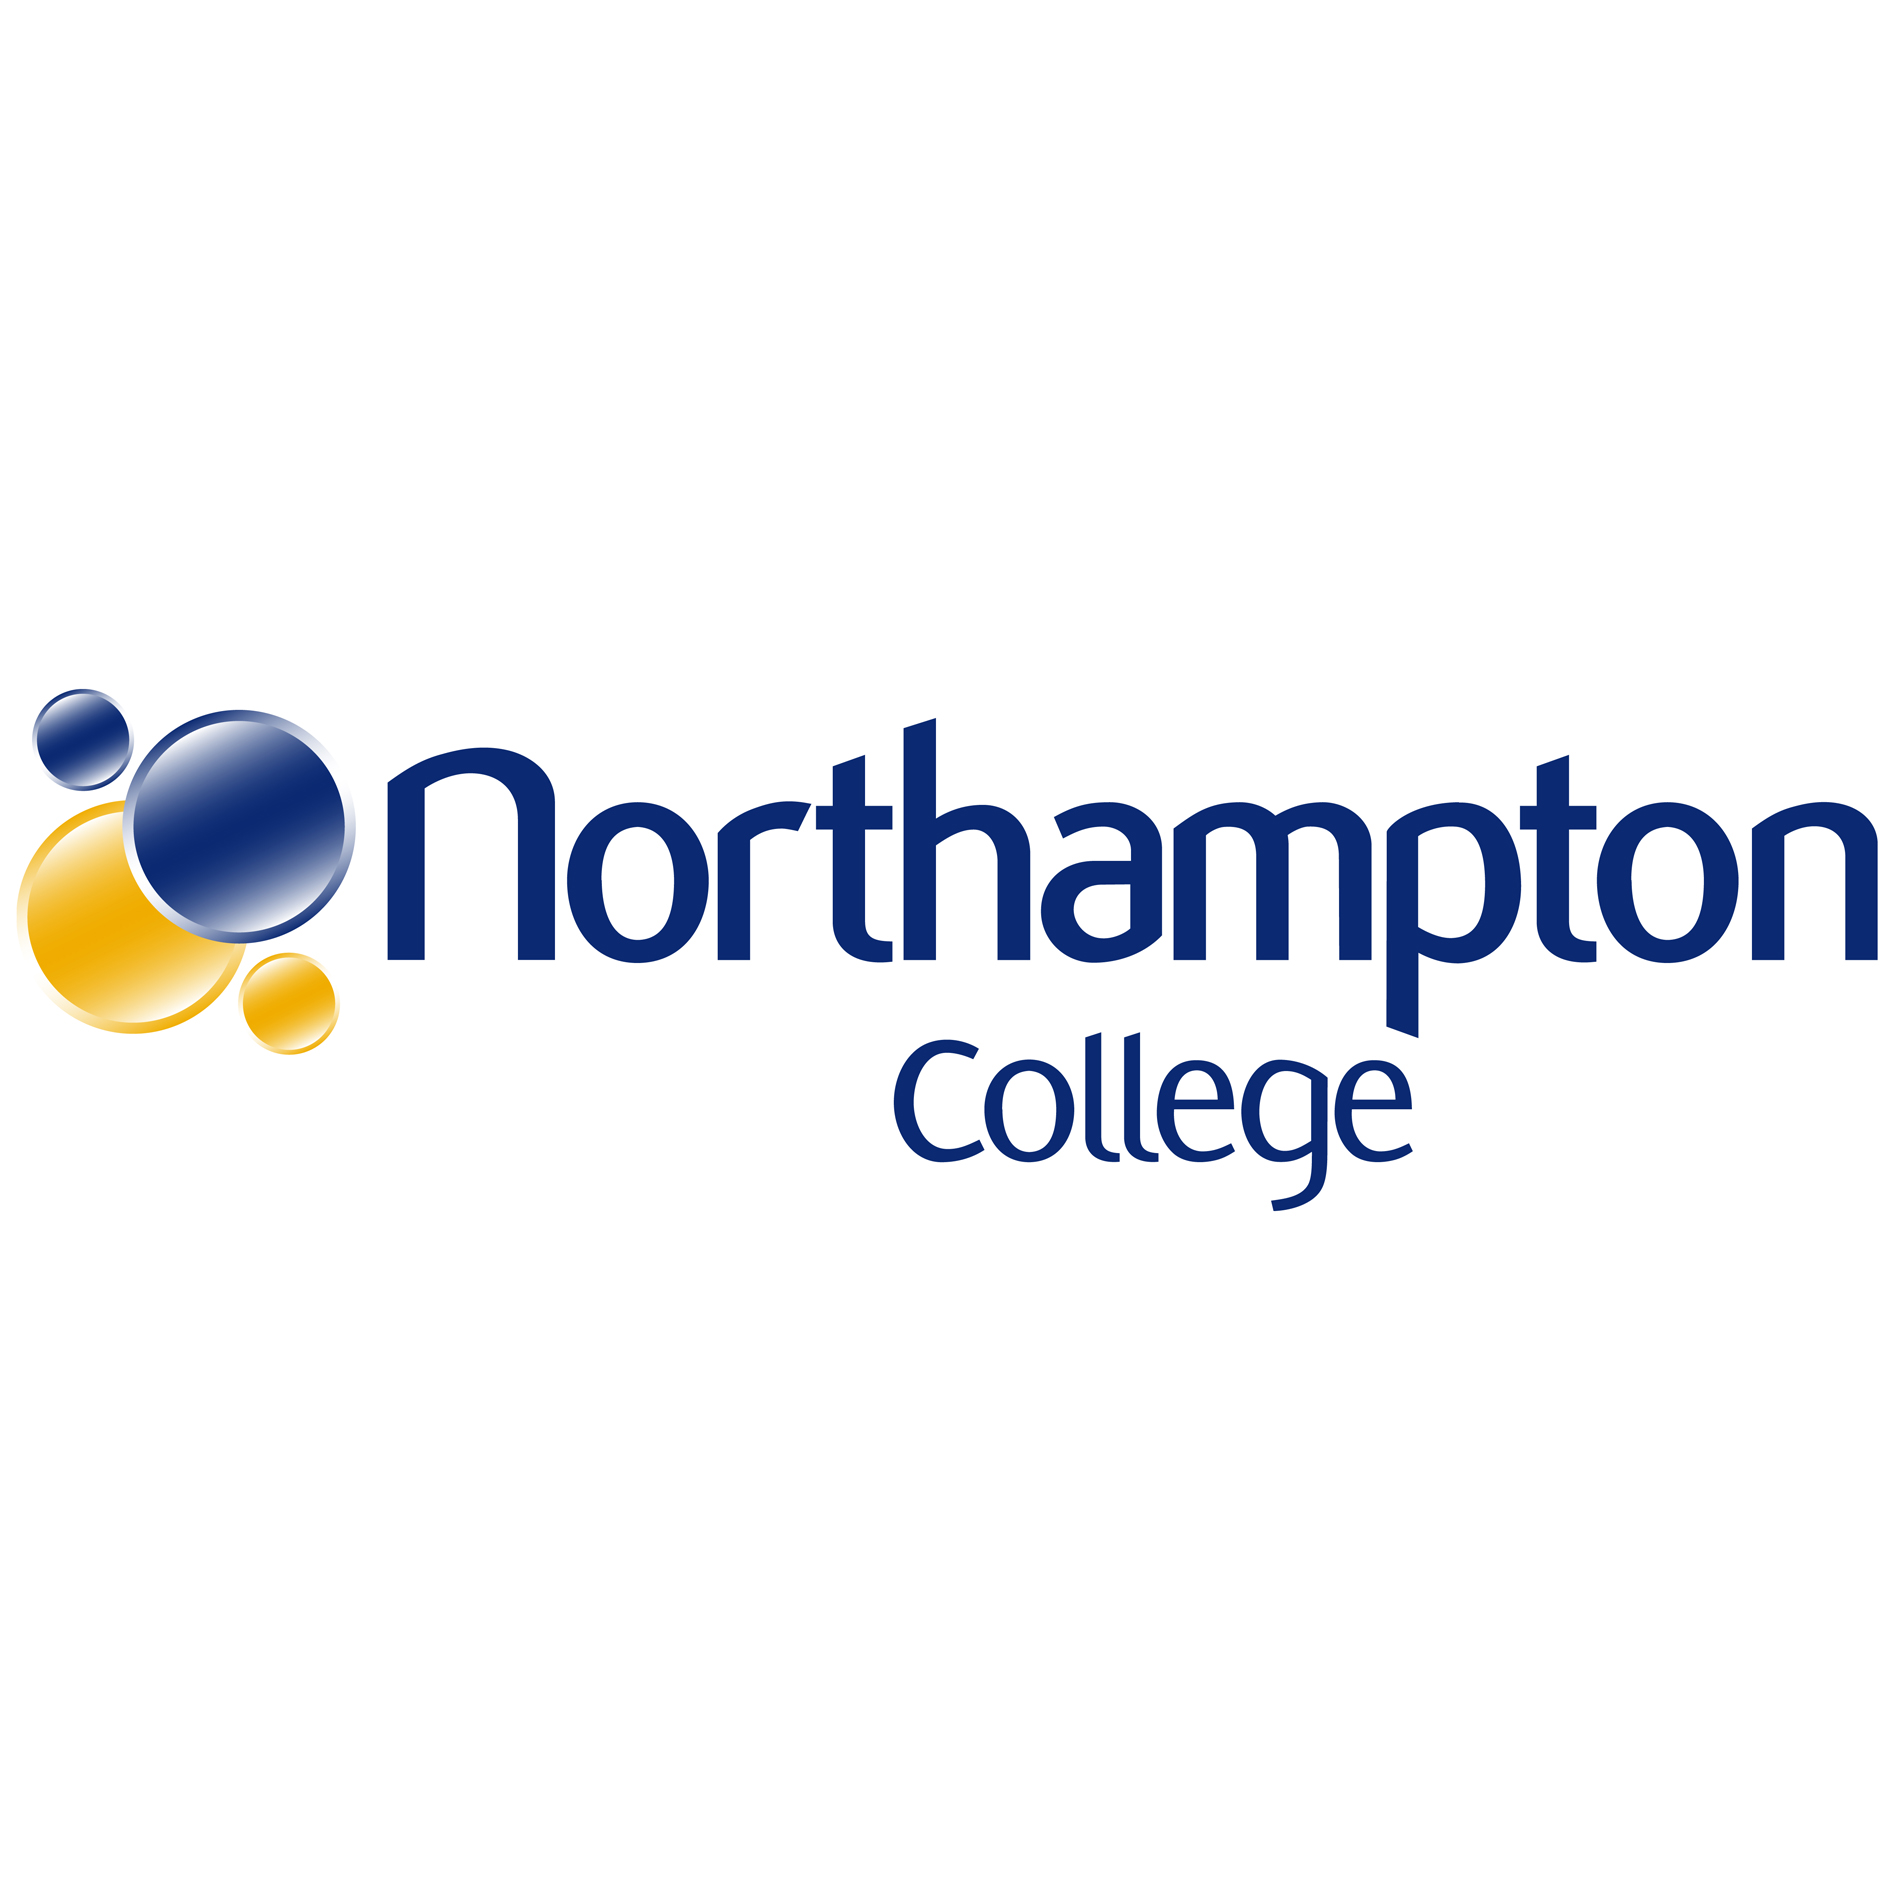 Our Client - Northampton College